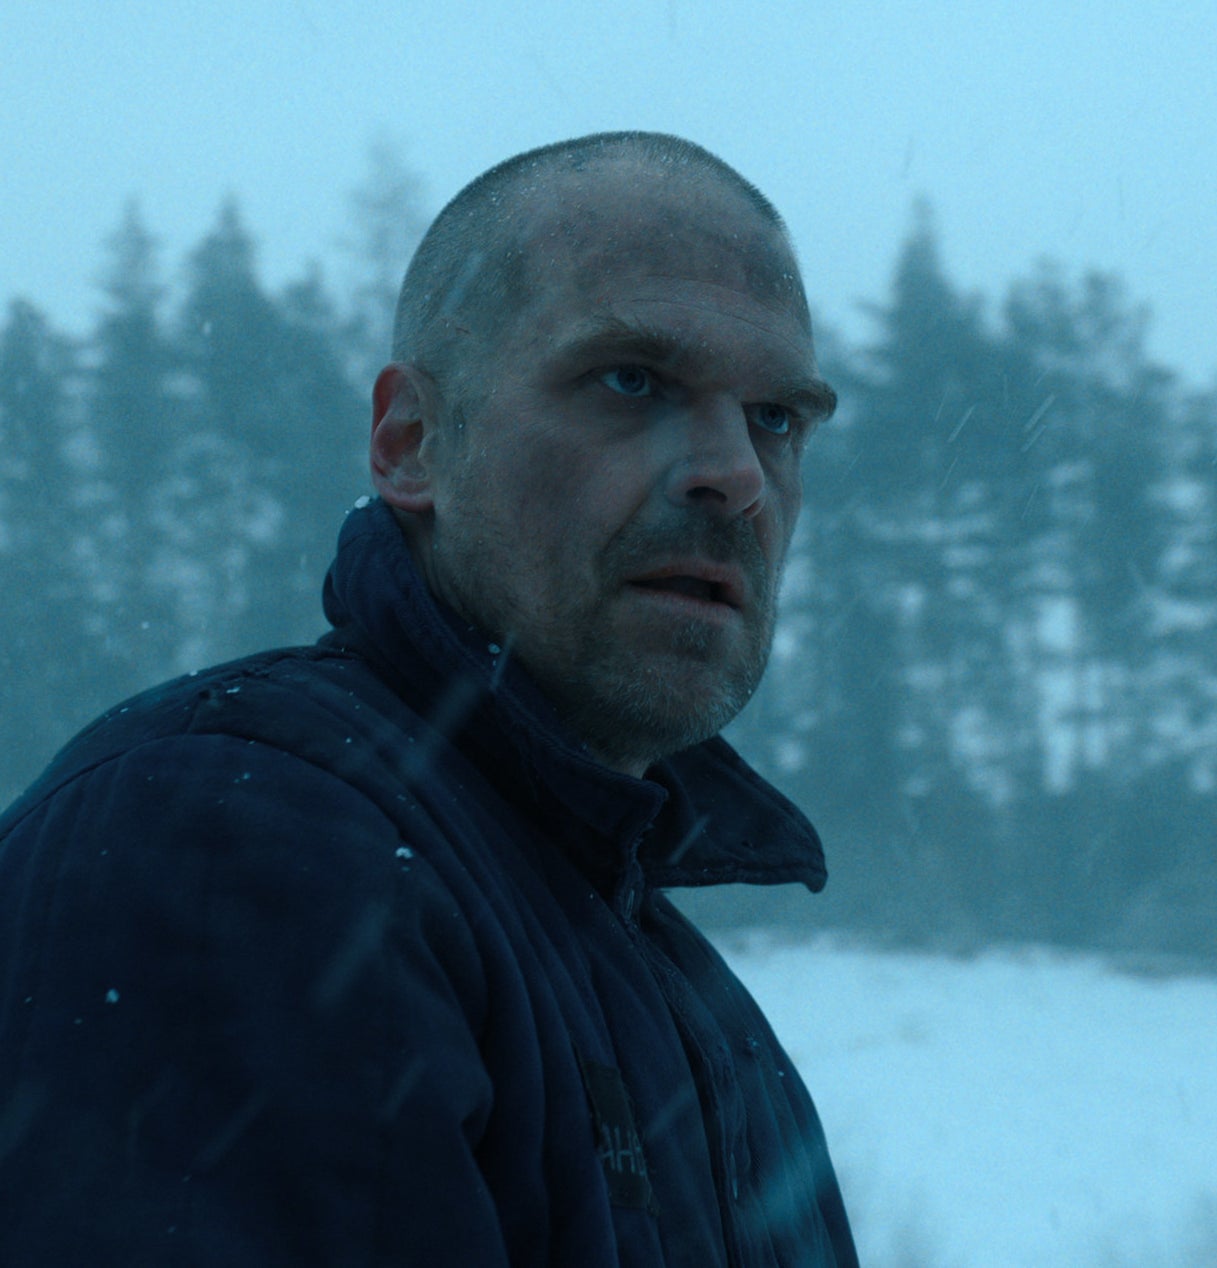 David Harbour outside in the snow